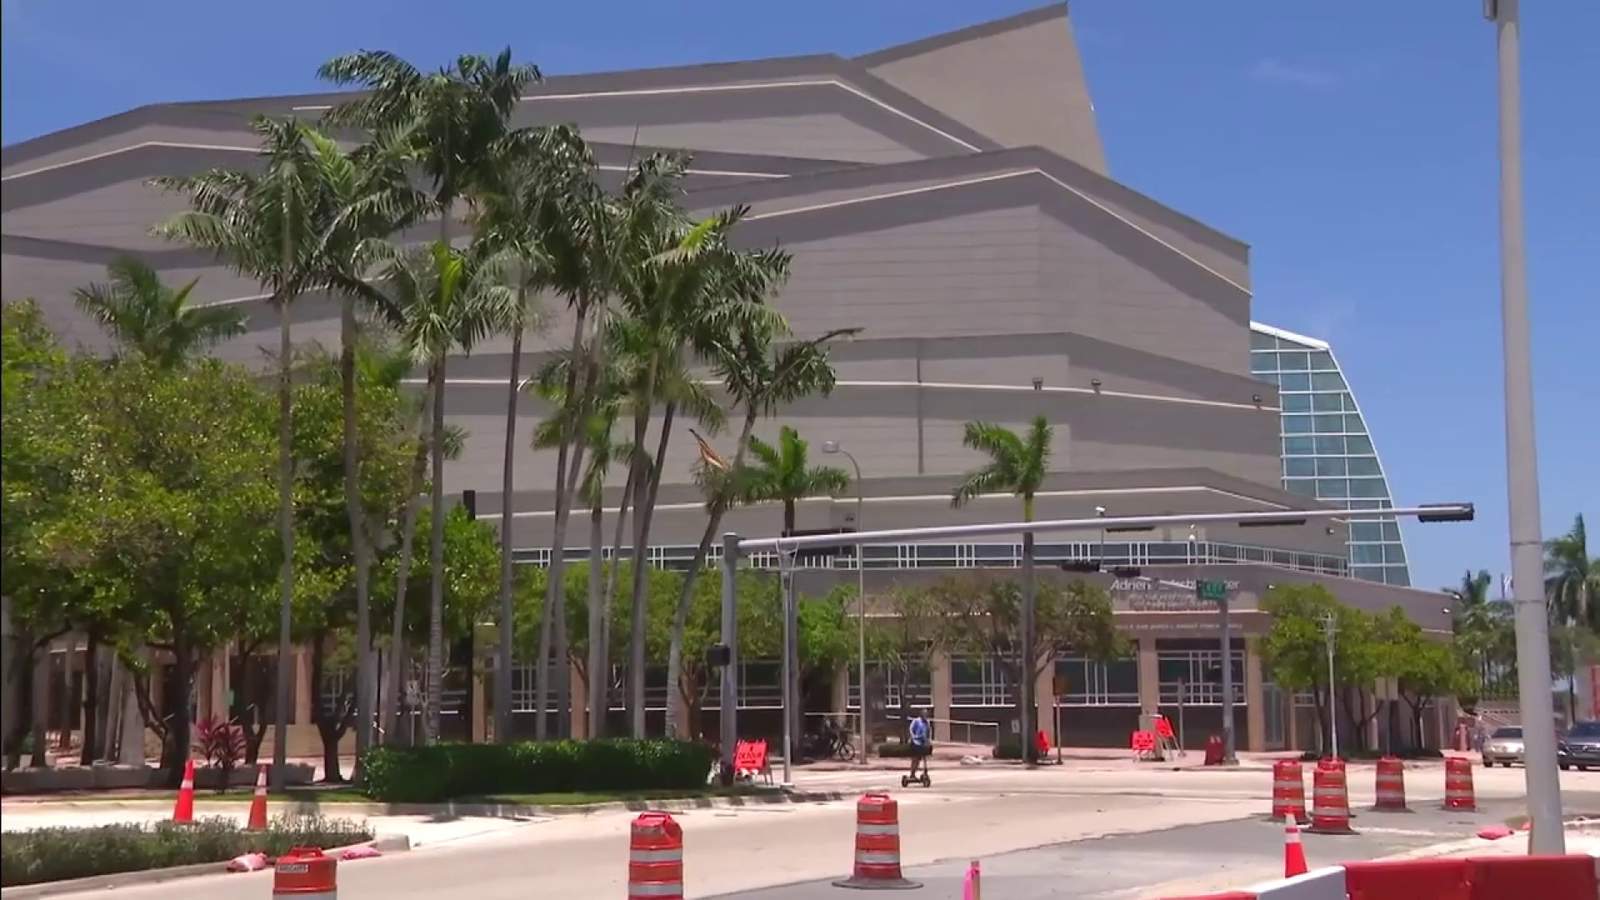 Plan for presidential debate in Miami remains in place pending Trump’s condition